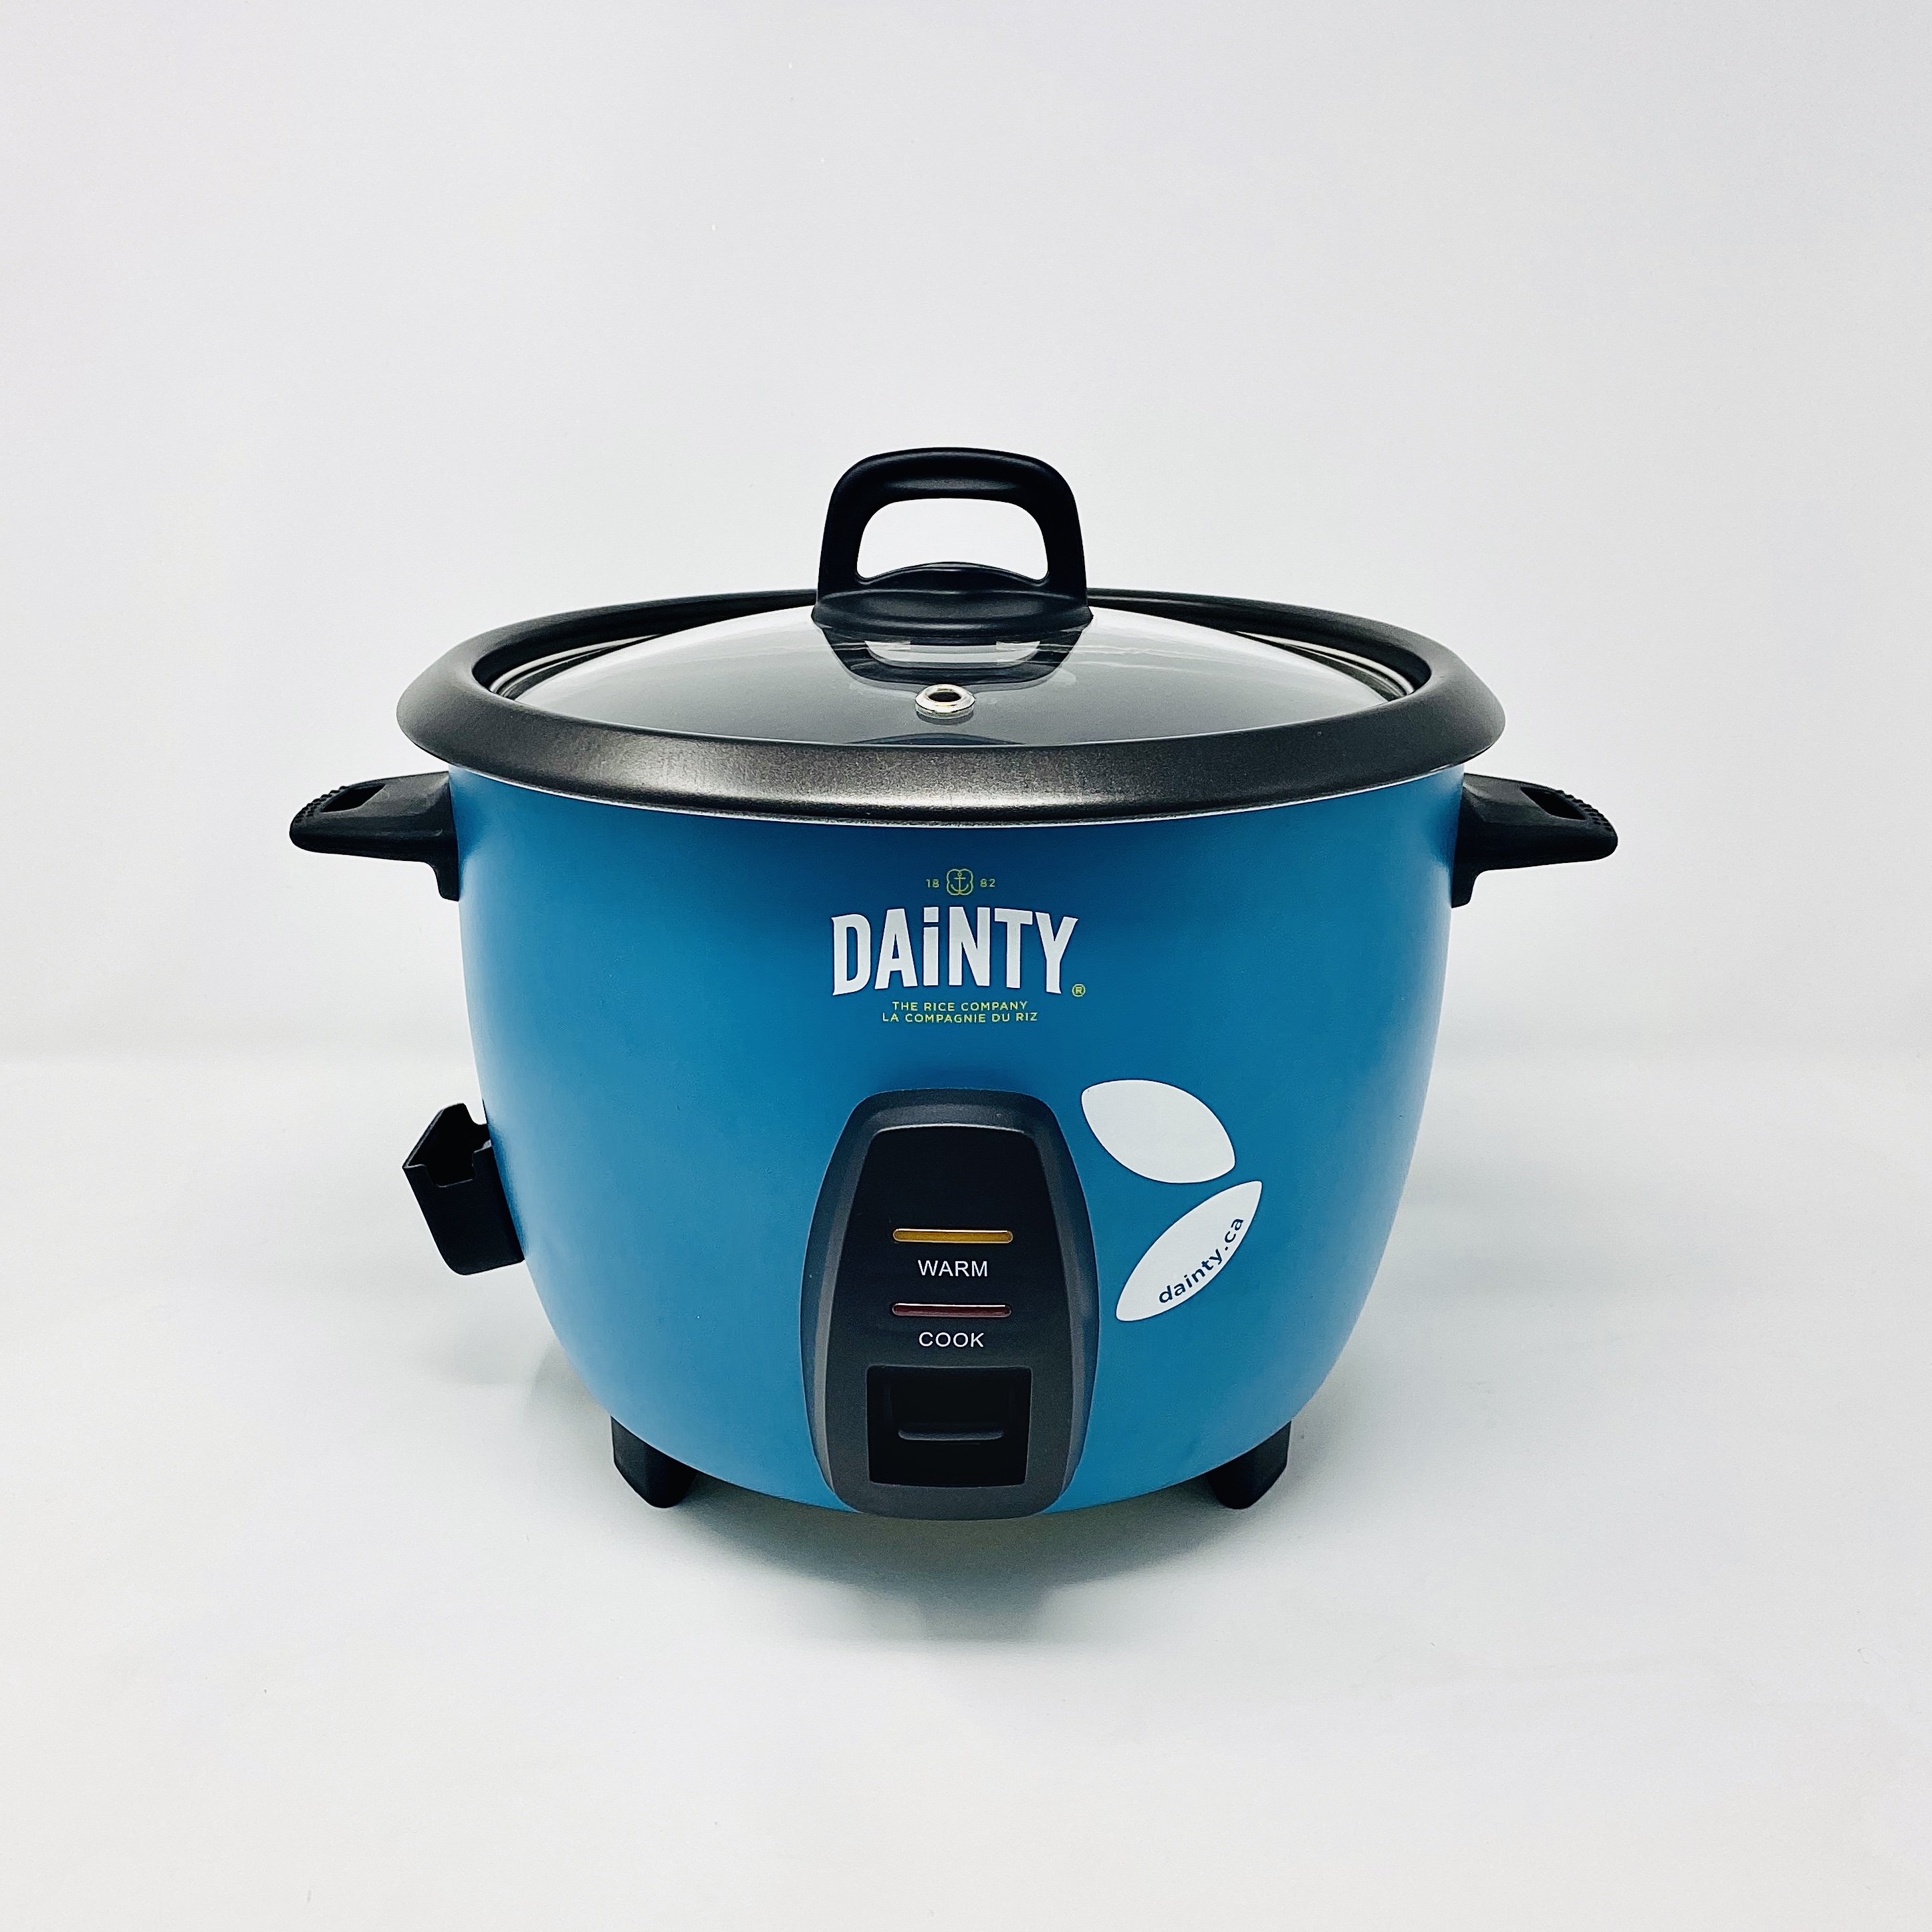 Dainty Rice cooker